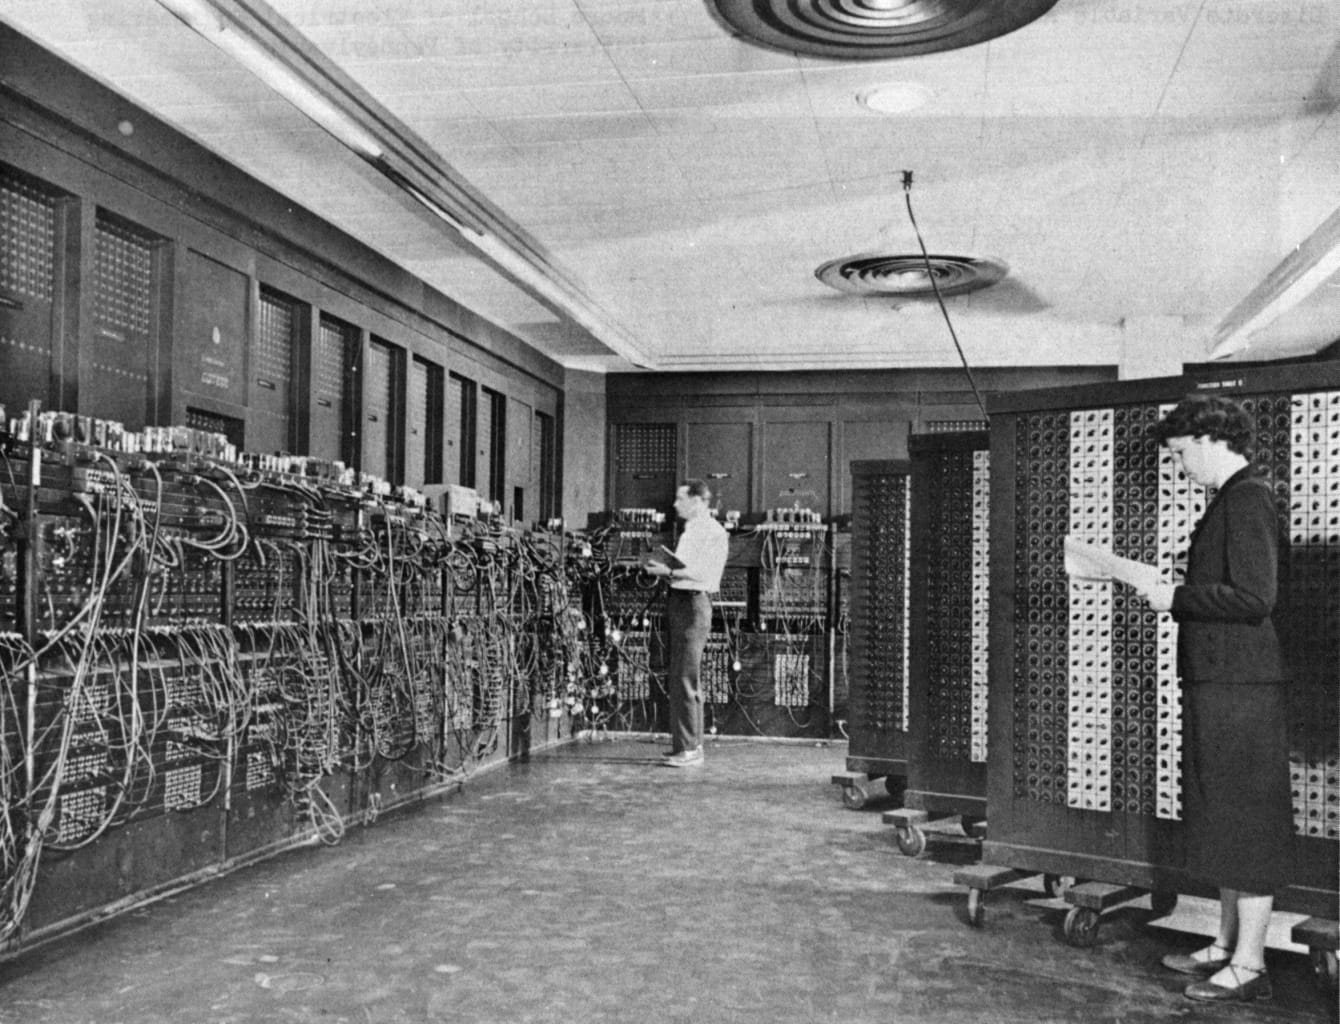 Glen_Beck_and_Betty_Snyder_program_the_ENIAC_in_building_328_at_the_Ballistic_Research_Laboratory.jpeg